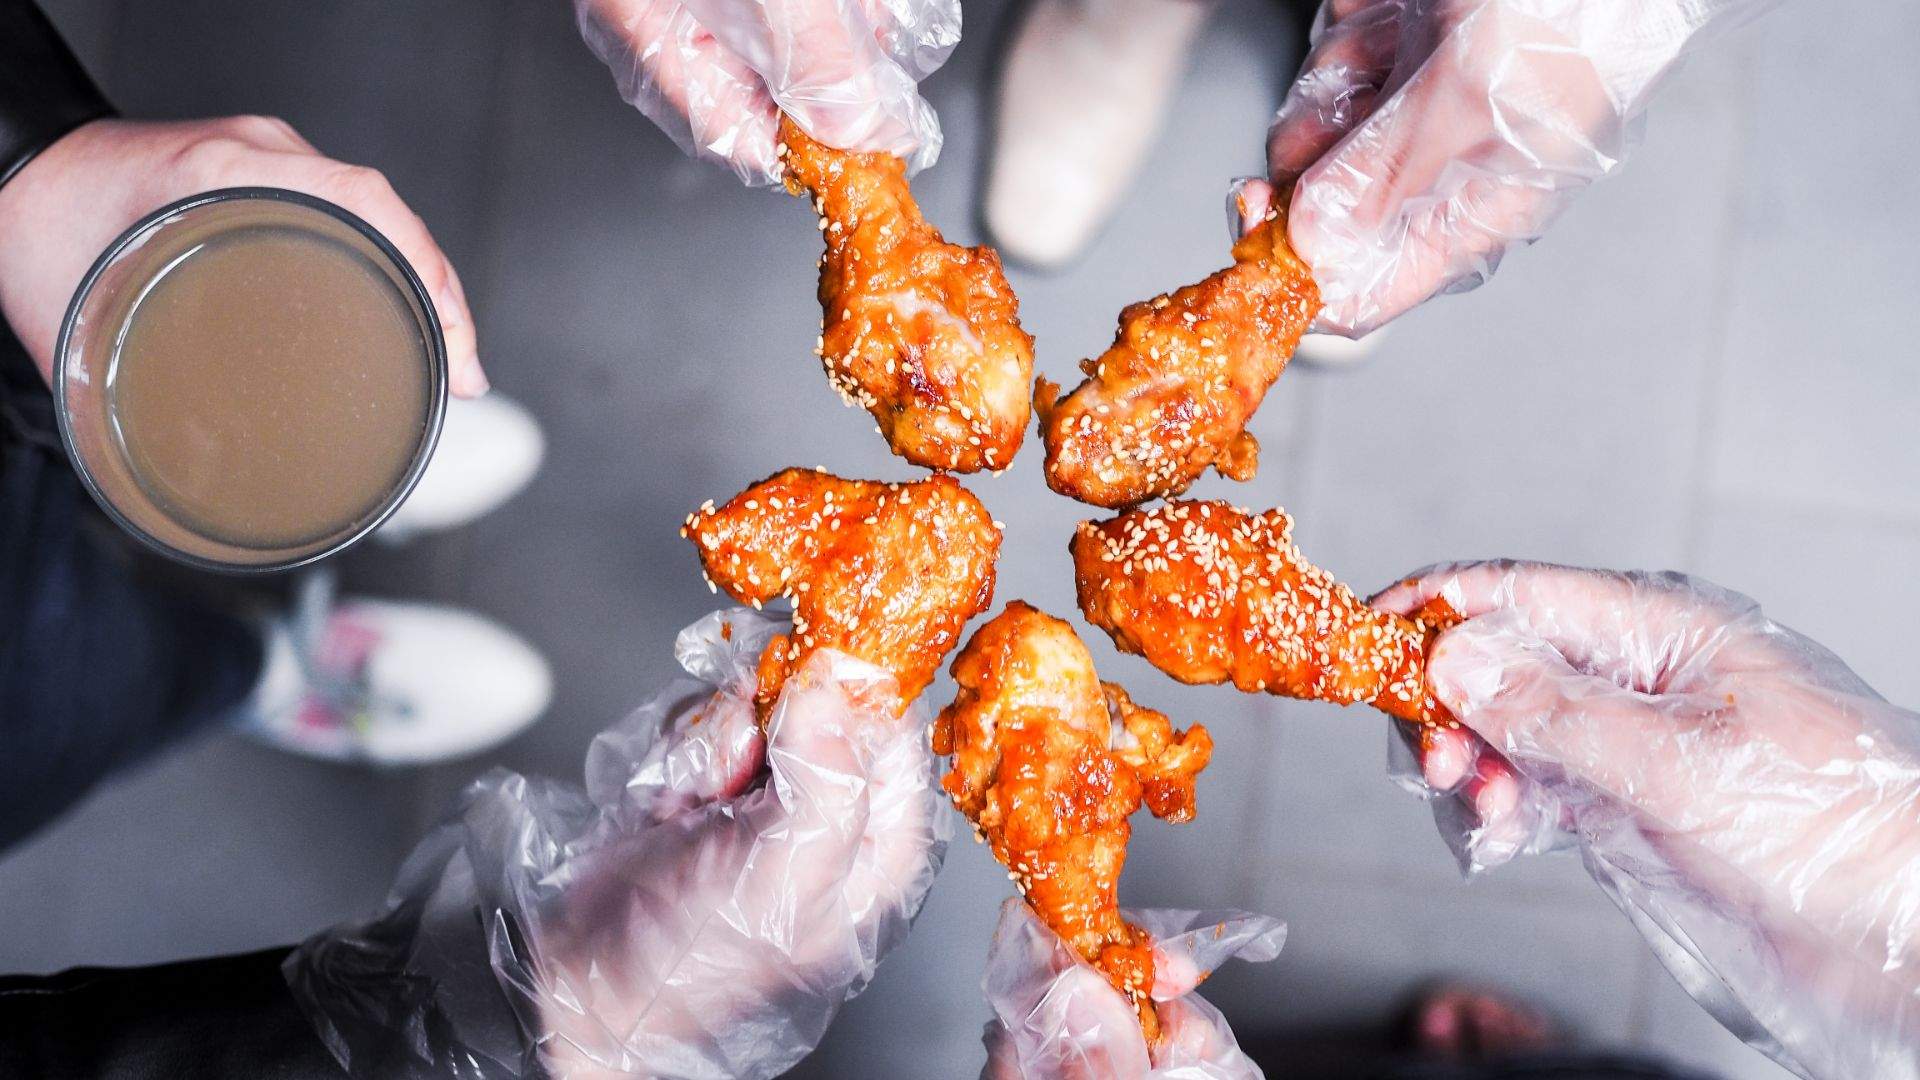 Famed Korean Fried Chicken Chain Pelicana Has Opened Its First Melbourne Store